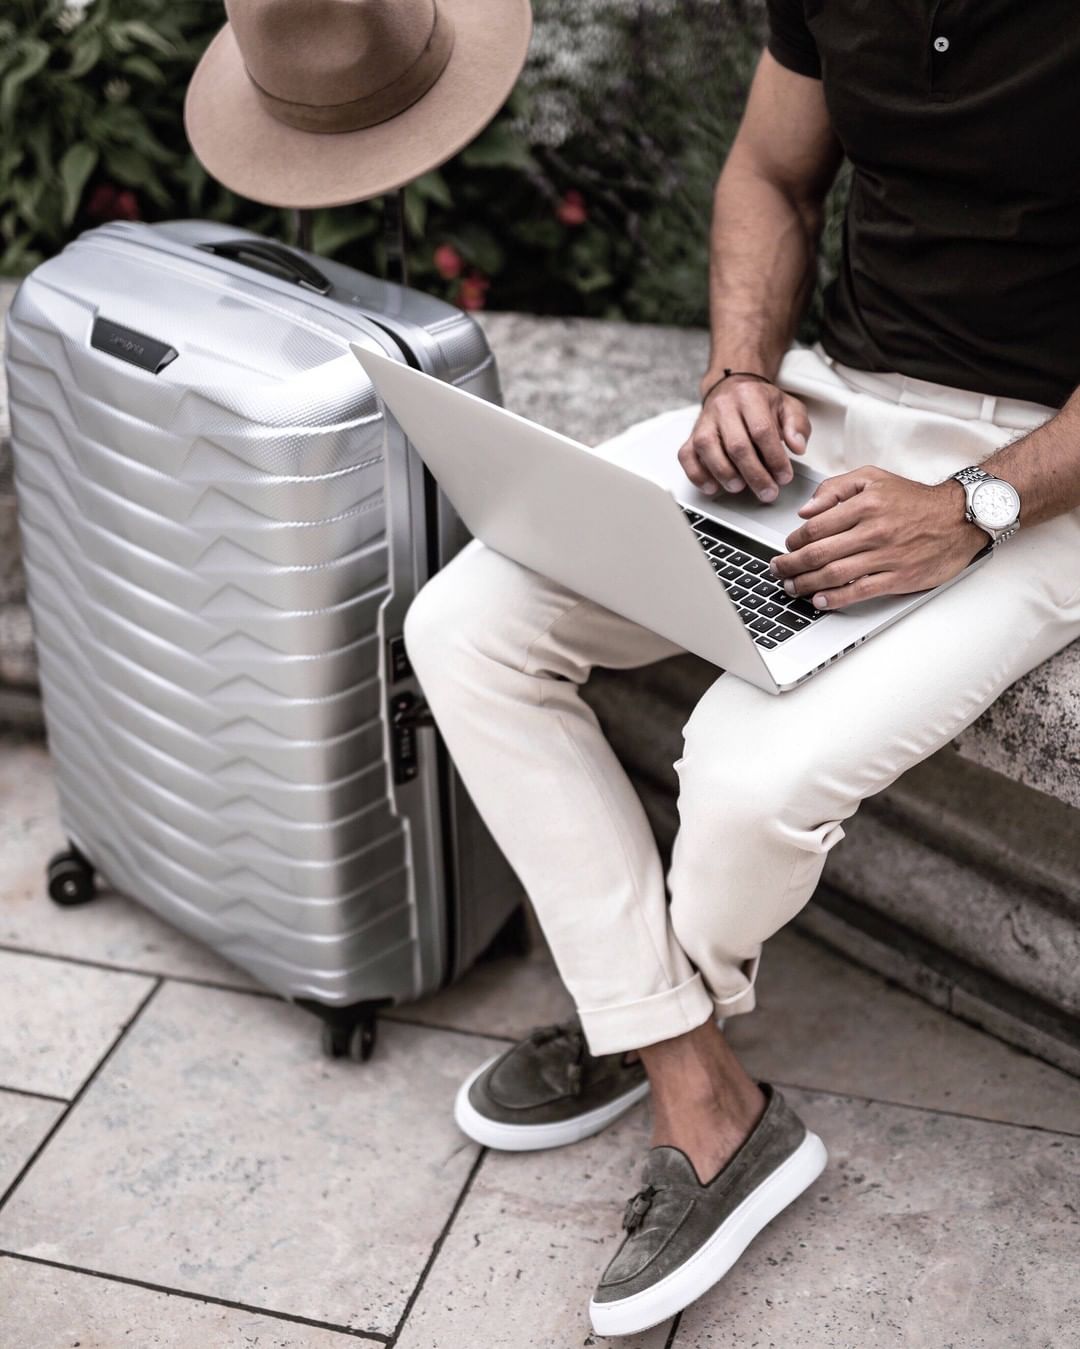 SAMSONITE - Your search for the ideal suitcase ends here. 💥 Discover our NEW #Proxis collection on samsonite.com #MySamsonite #ExpectInnovation #NewIn ——————————————————————— #travel #travelphotograph...